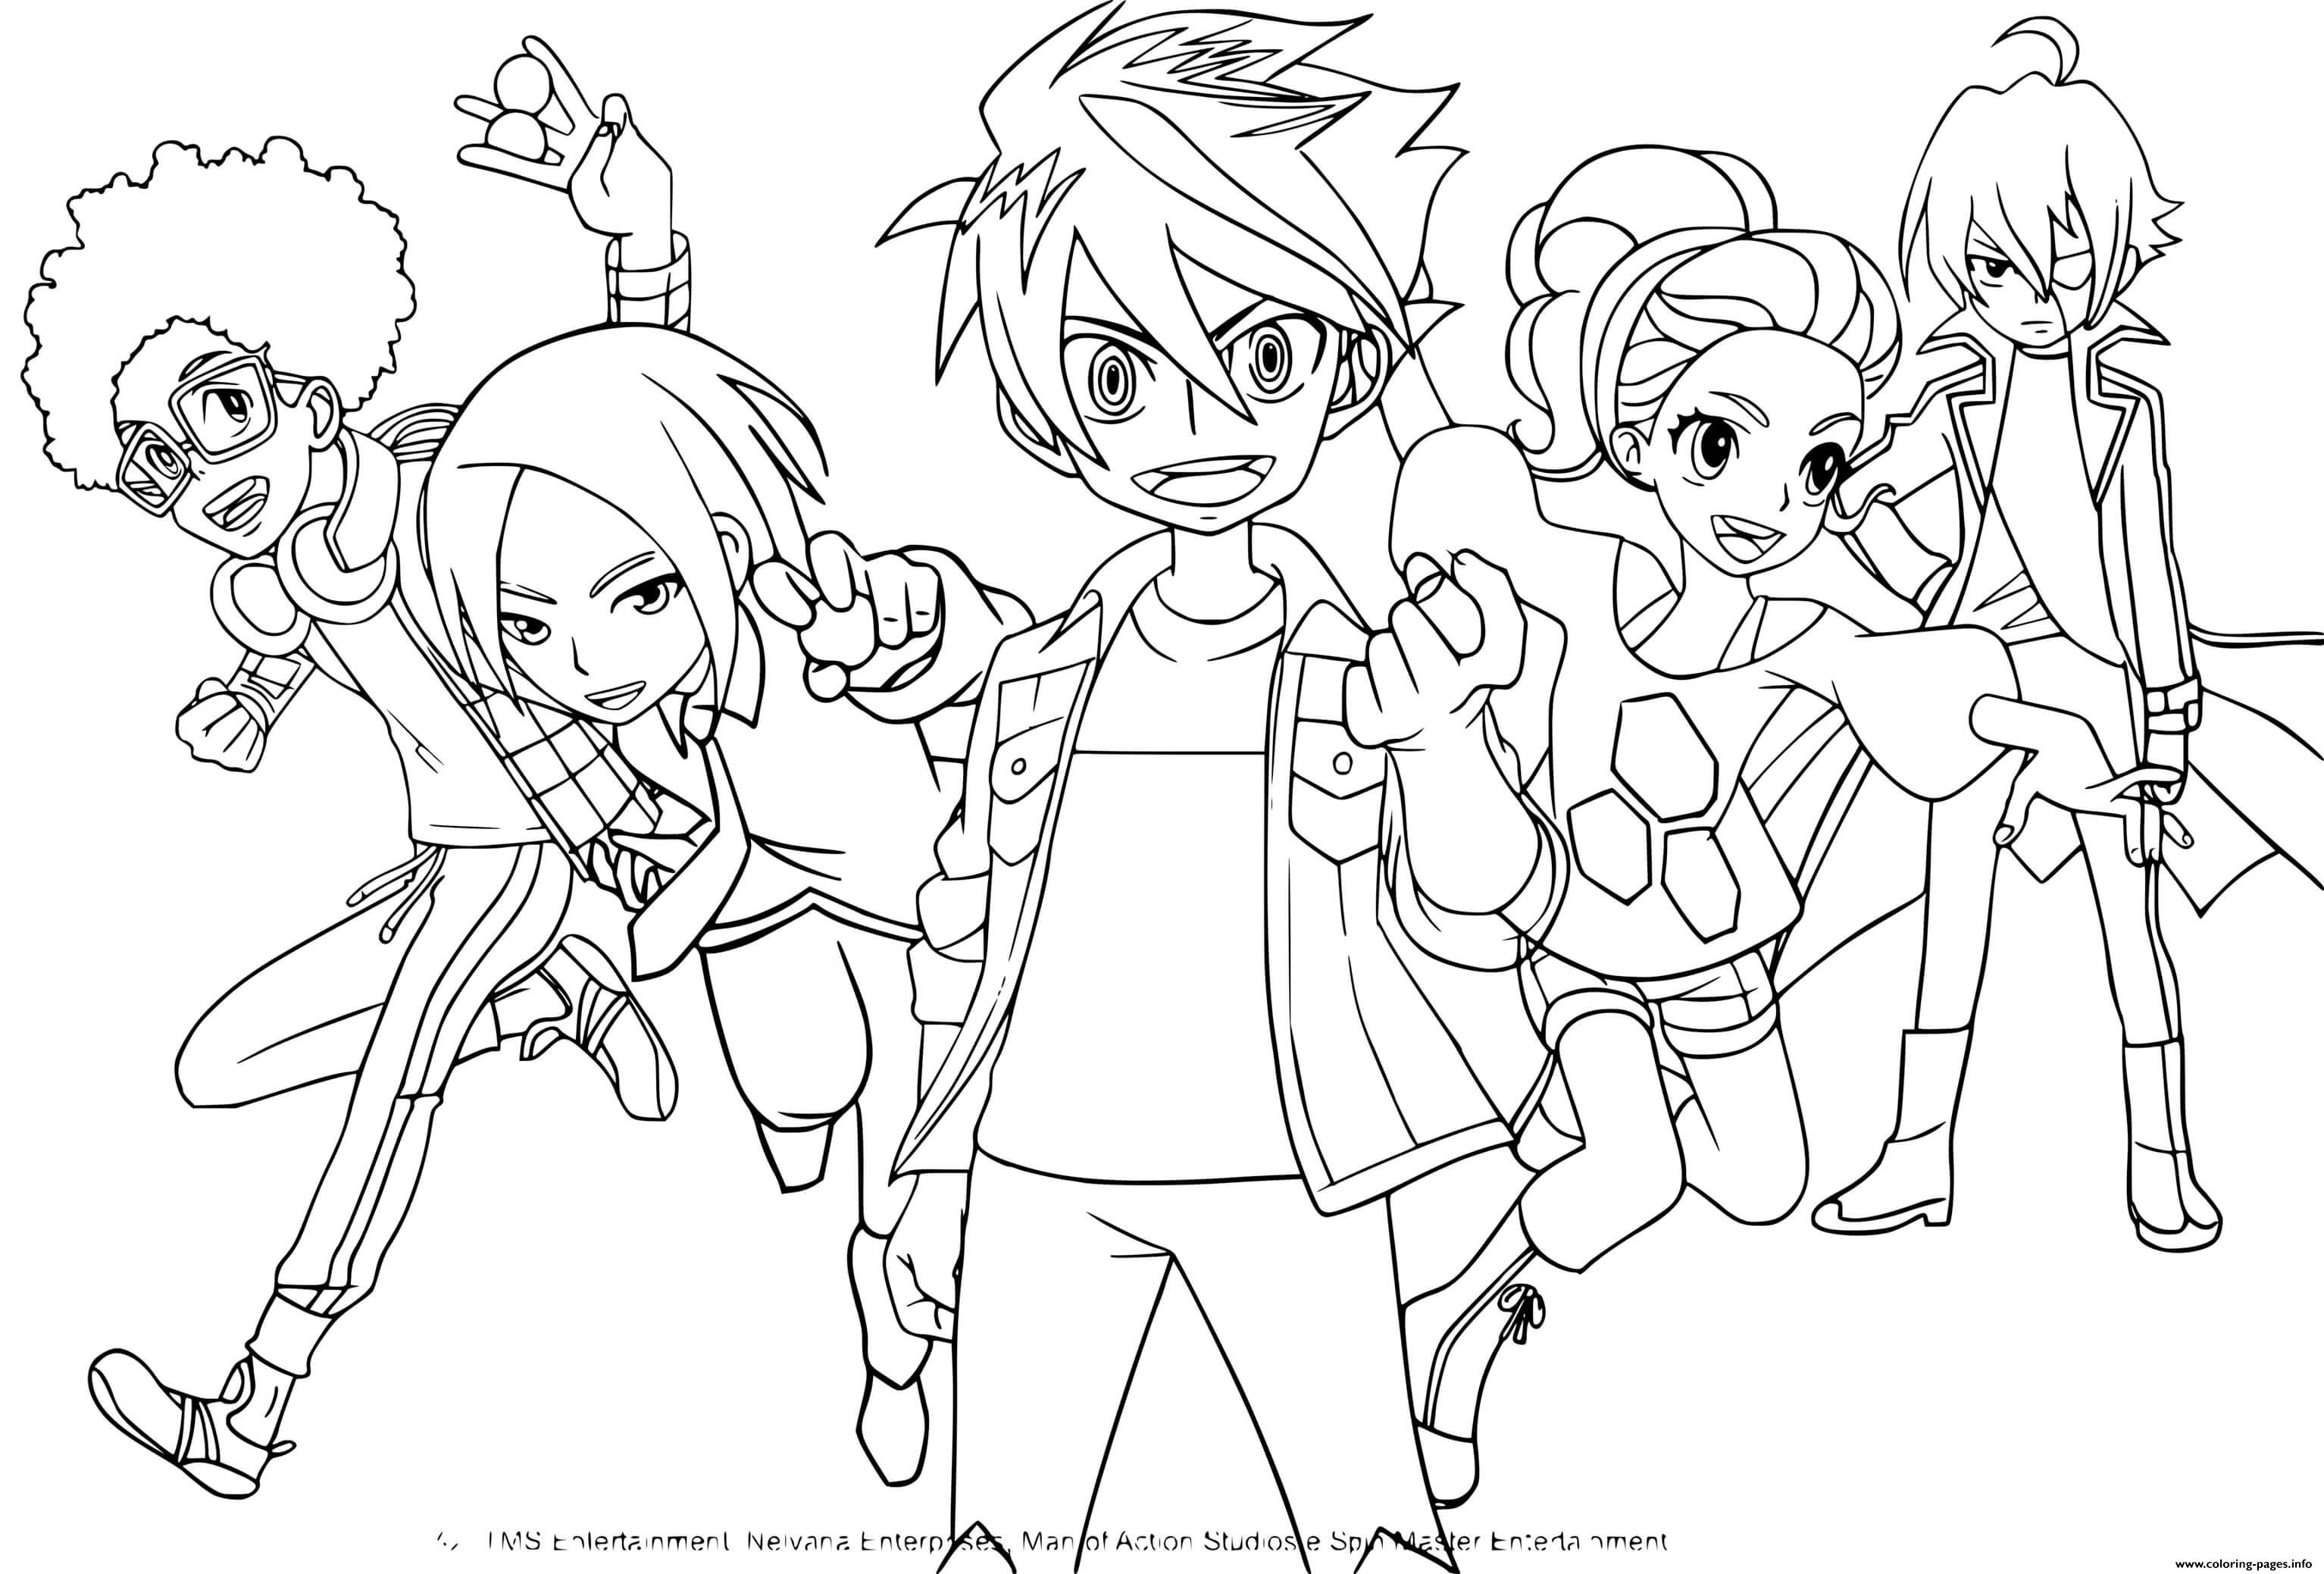 bakugan-coloring-pages-for-kids-img-sunflower